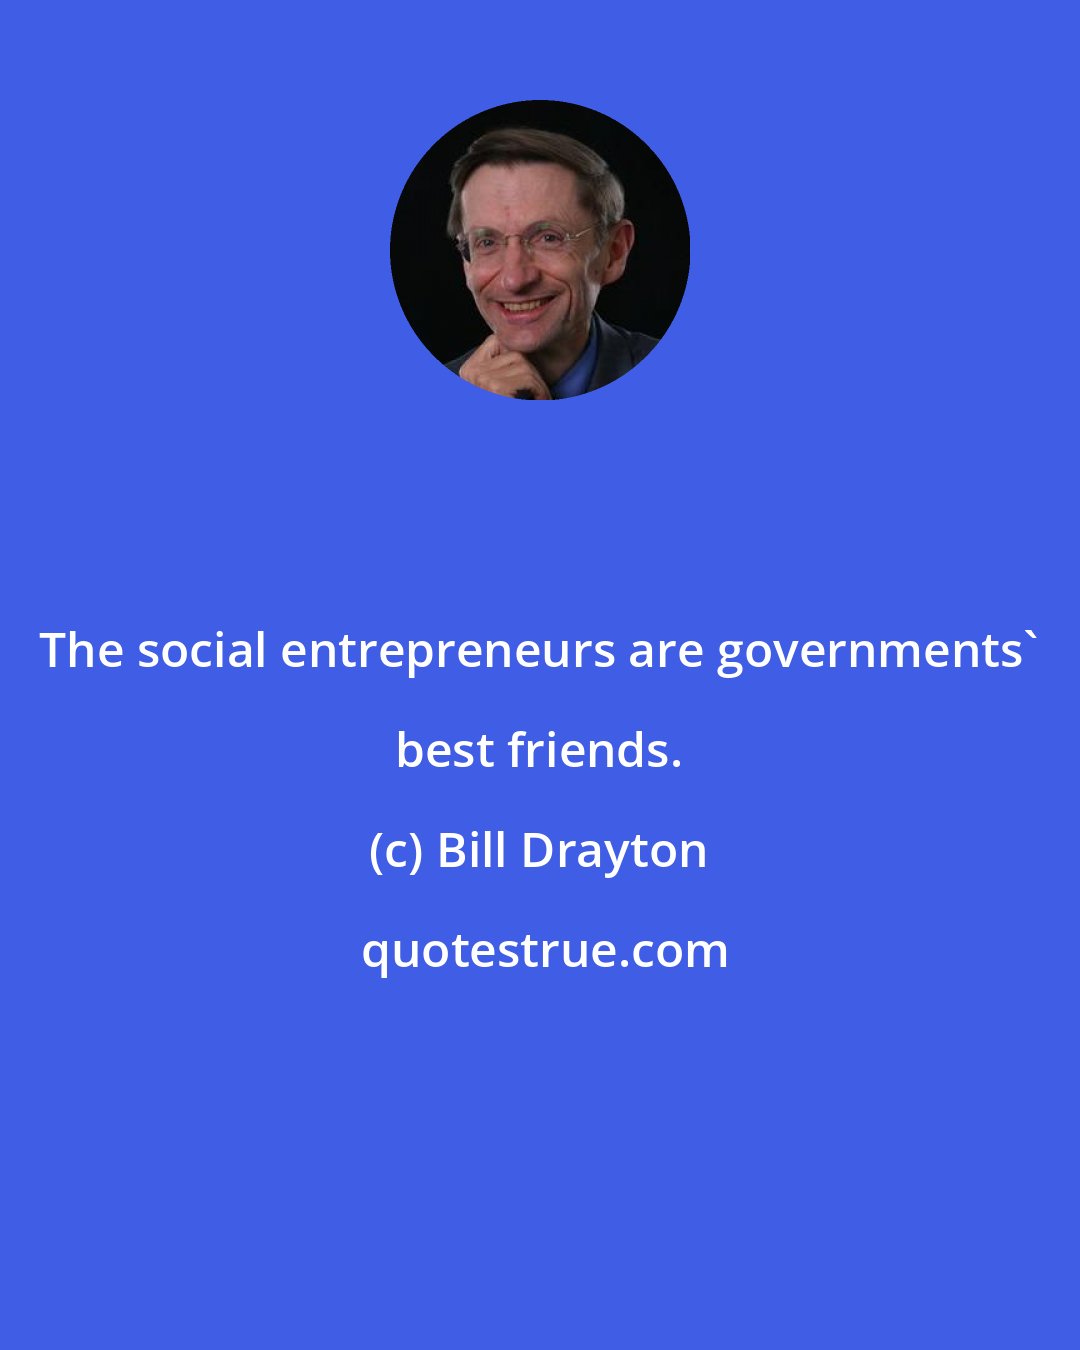 Bill Drayton: The social entrepreneurs are governments' best friends.